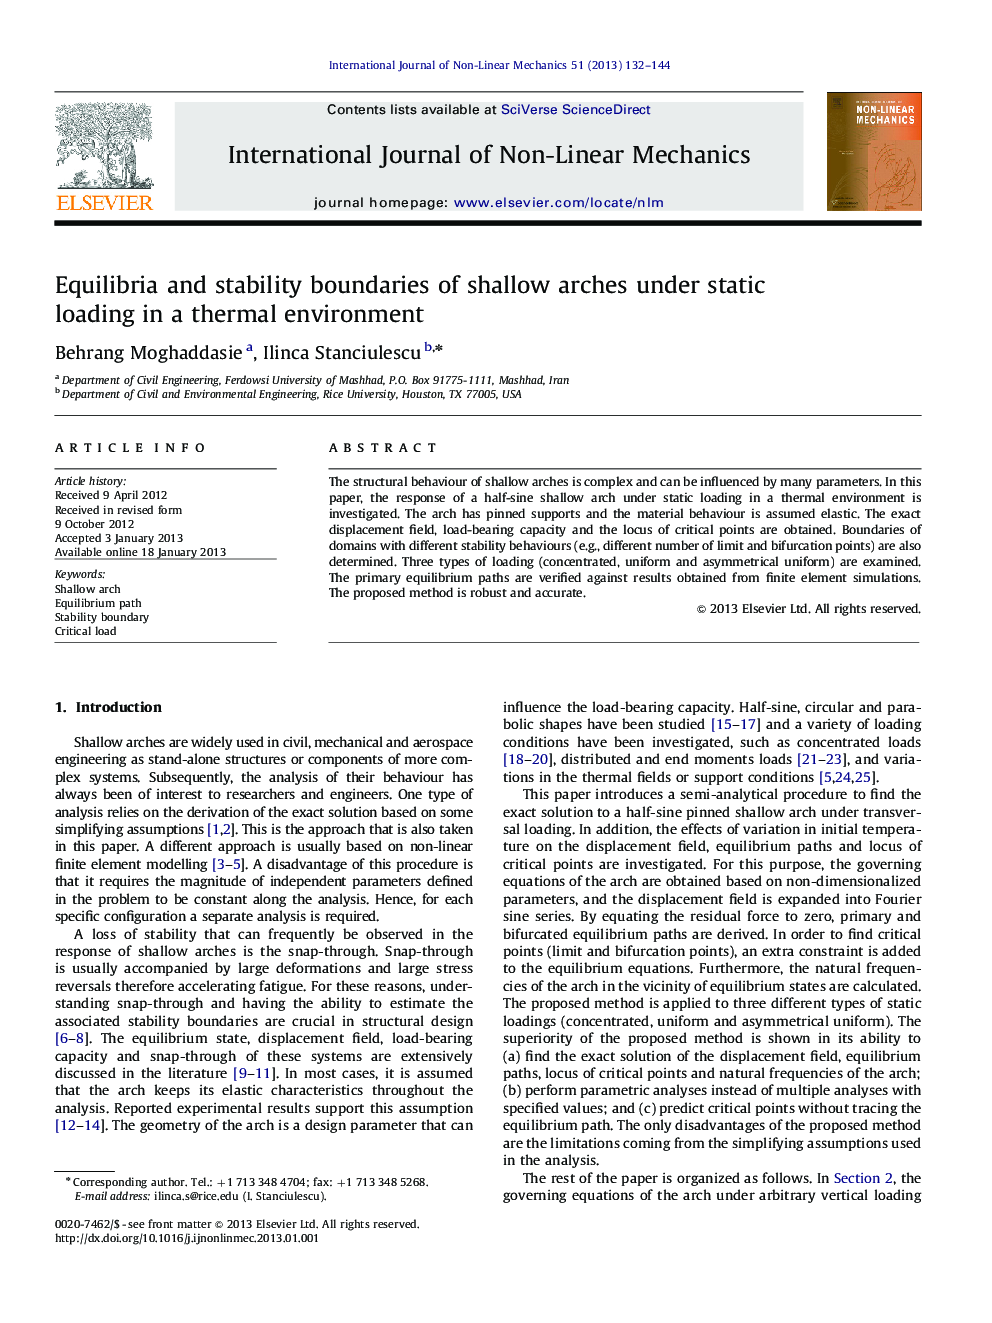 Equilibria and stability boundaries of shallow arches under static loading in a thermal environment